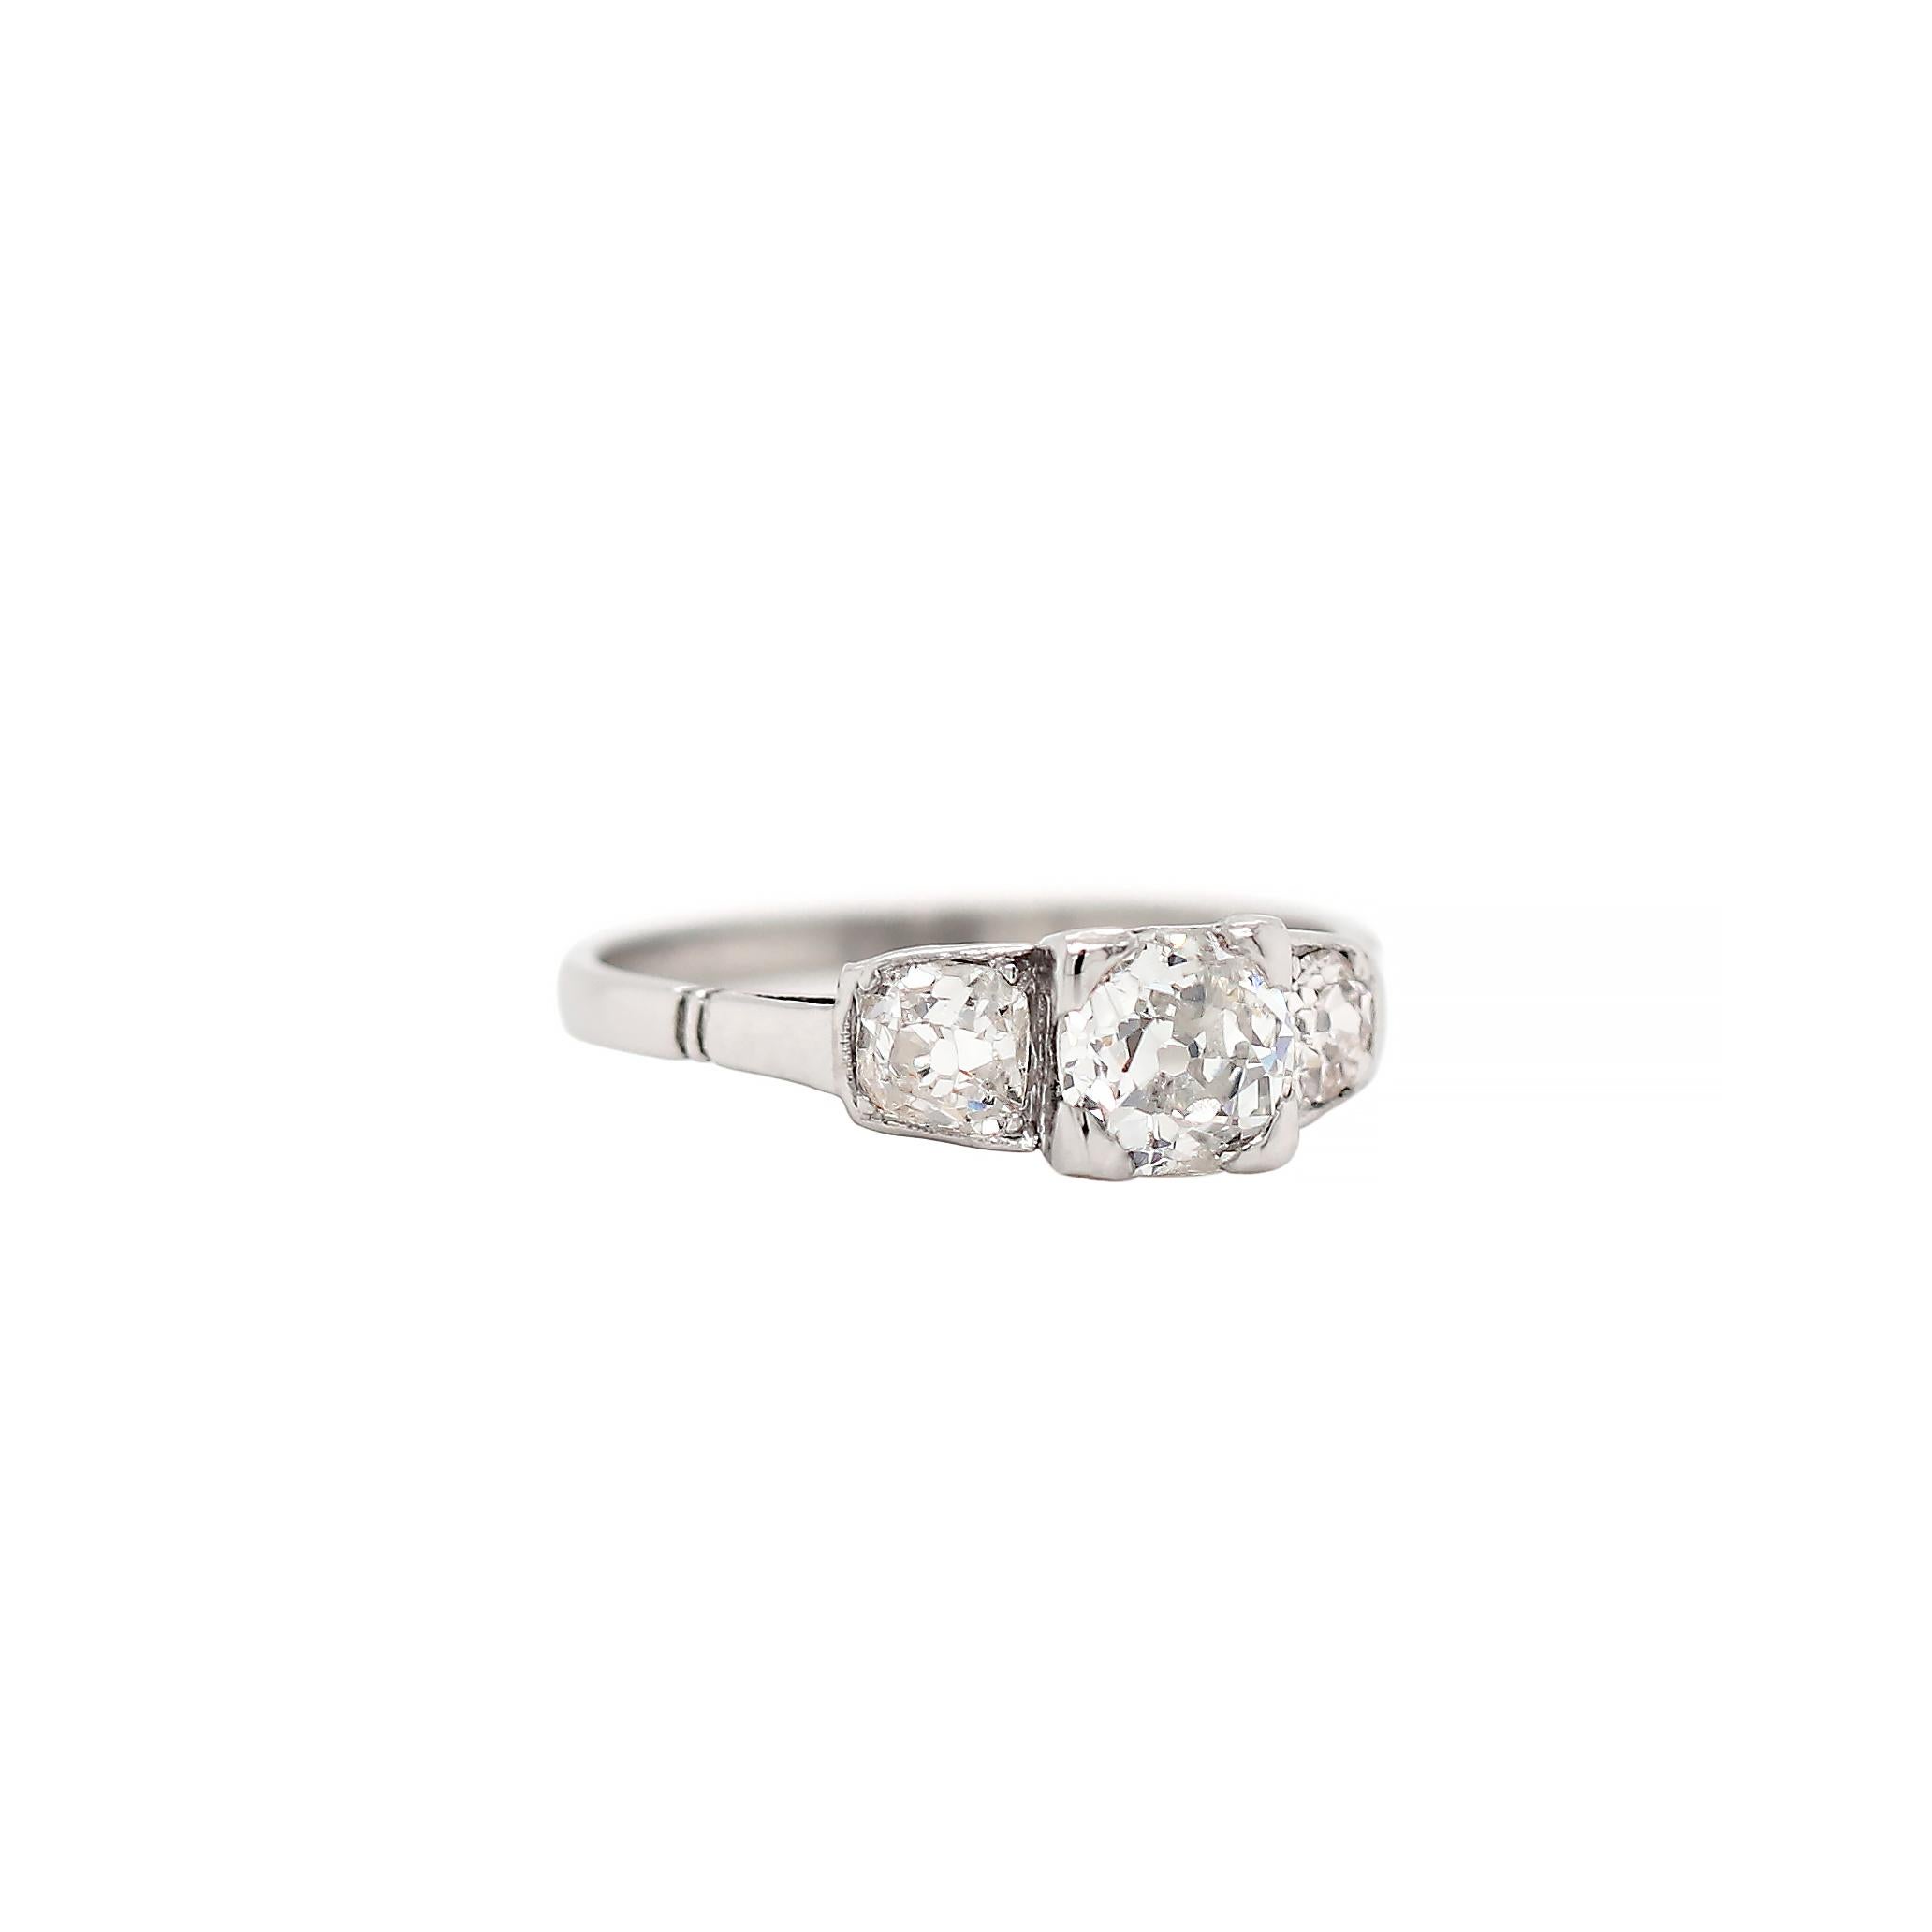 This beautiful antique diamond three stone engagement ring features an old cut diamond centre stone weighing 0.75ct in a four claw open back setting. The diamond is mounted in-between two old cut diamonds with a combined approximate weight of 0.35ct